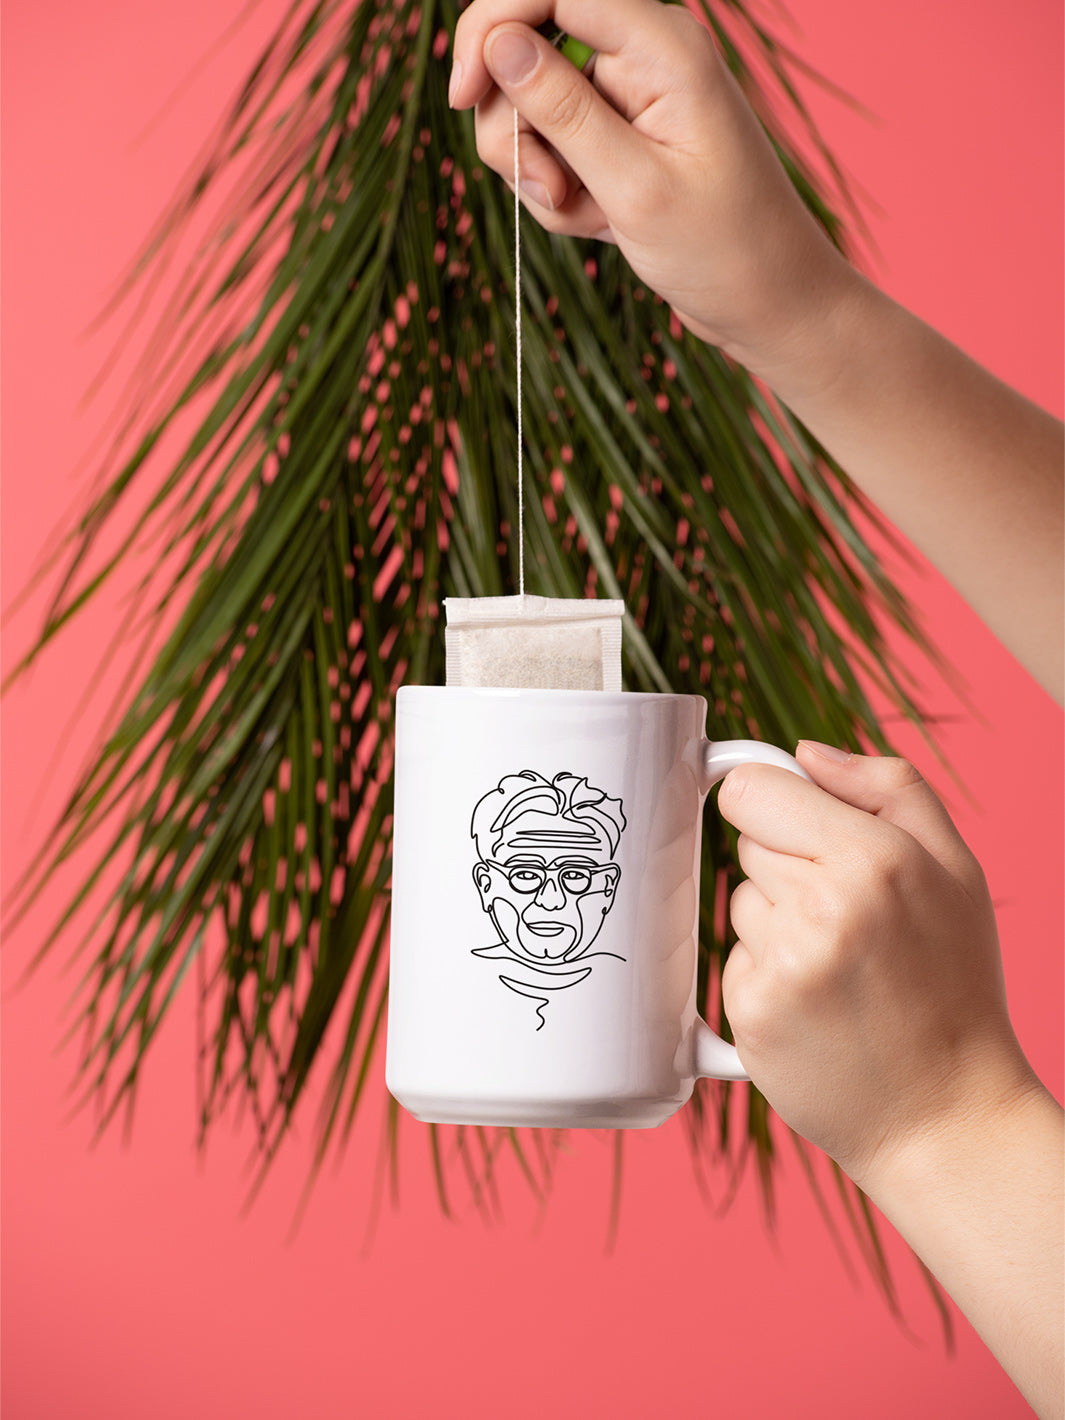 Single Line Drawing Of Joseph Pilates on a 15oz white coffee mug. There is a woman's hand dunking a tea bag against a coral background with a palm from.